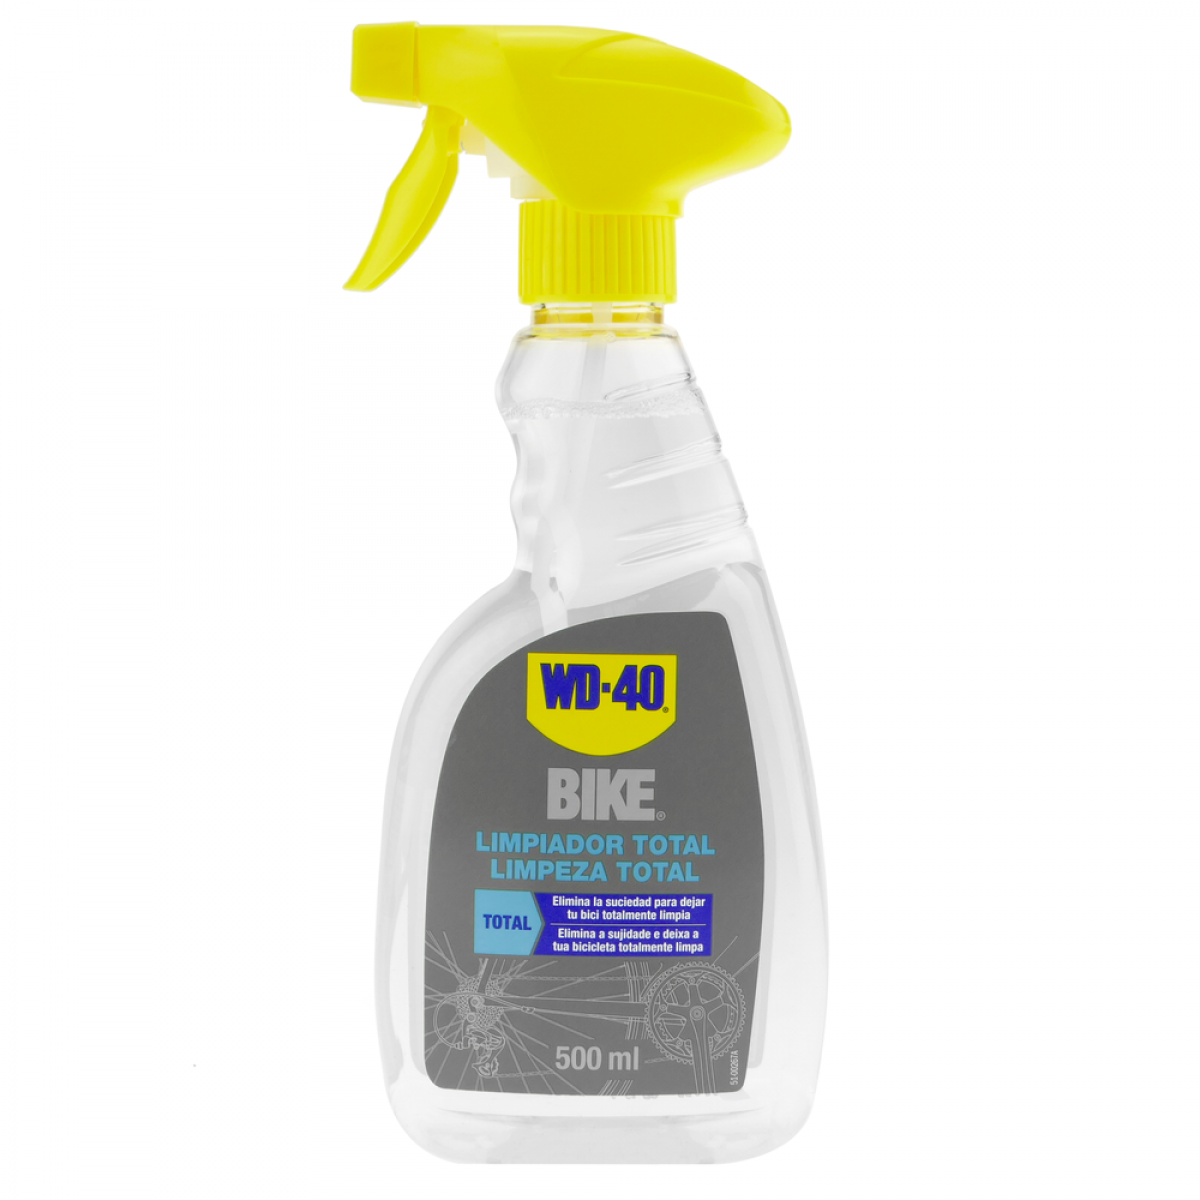 Wd-40 - Nettoyant total BIKE 500 ml - Mastic, silicone, joint